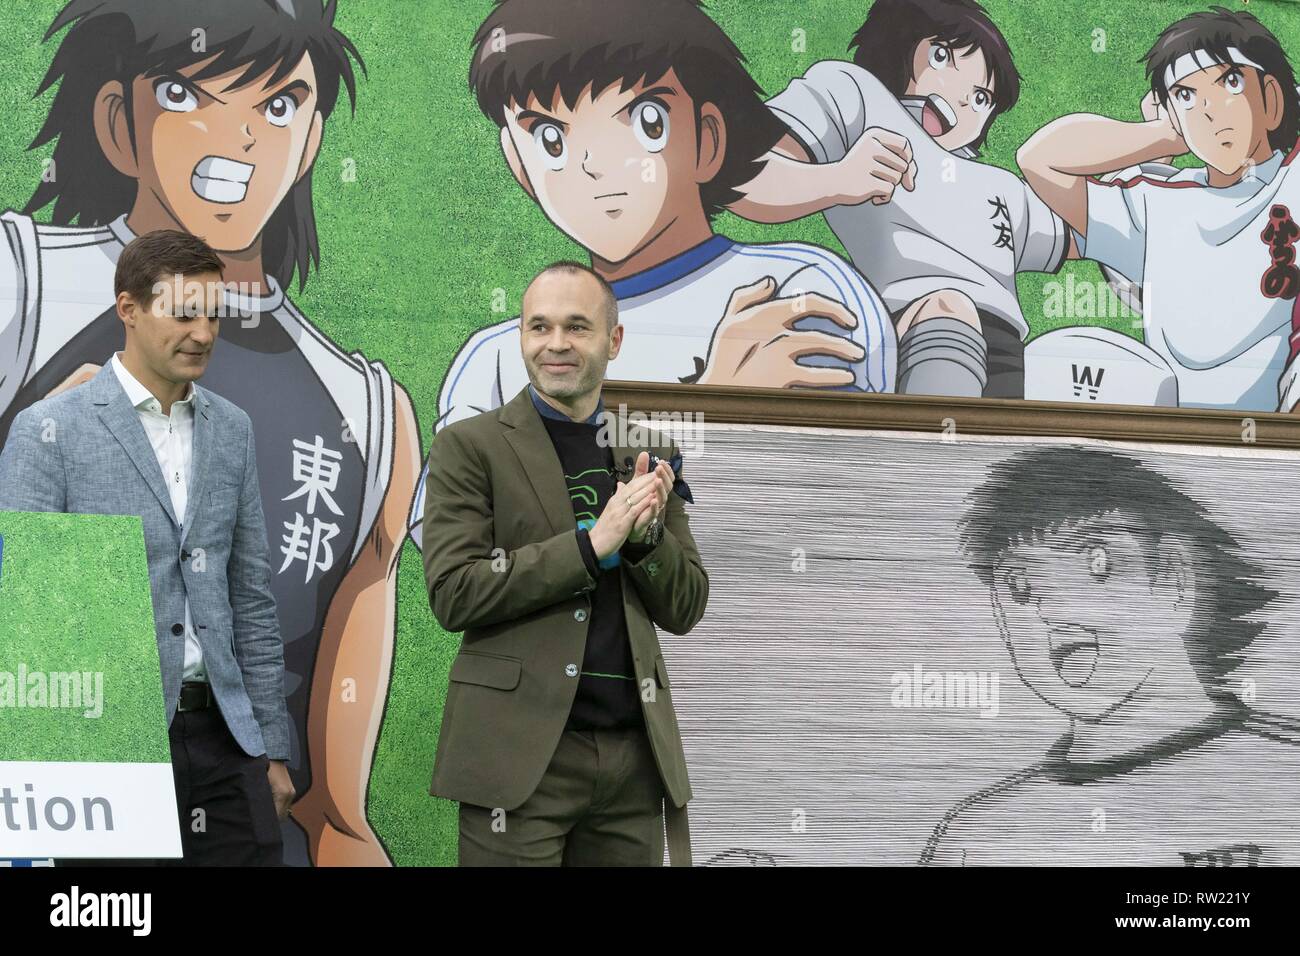 March 4, 2019 - Tokyo, Japan - Barcelona legend playmaker Andres Iniesta attends an opening ceremony for the Yotsugi Station and Captain Tsubasa project. Iniesta was named Official Collaborator for the Yotsugi Station and Captain Tsubasa project, which aims to promote the tourism in the ward of Katsushika, the hometown of Yoichi Takahashi author of the Captain Tsubasa manga. Iniesta who is playing for the Japanese football club Vissel Kobe also visited the Yotsugi Station to see Captain Tsubasa manga characters decorating the interior of the train station. (Credit Image: © Rodrigo Reyes Marin/ Stock Photo